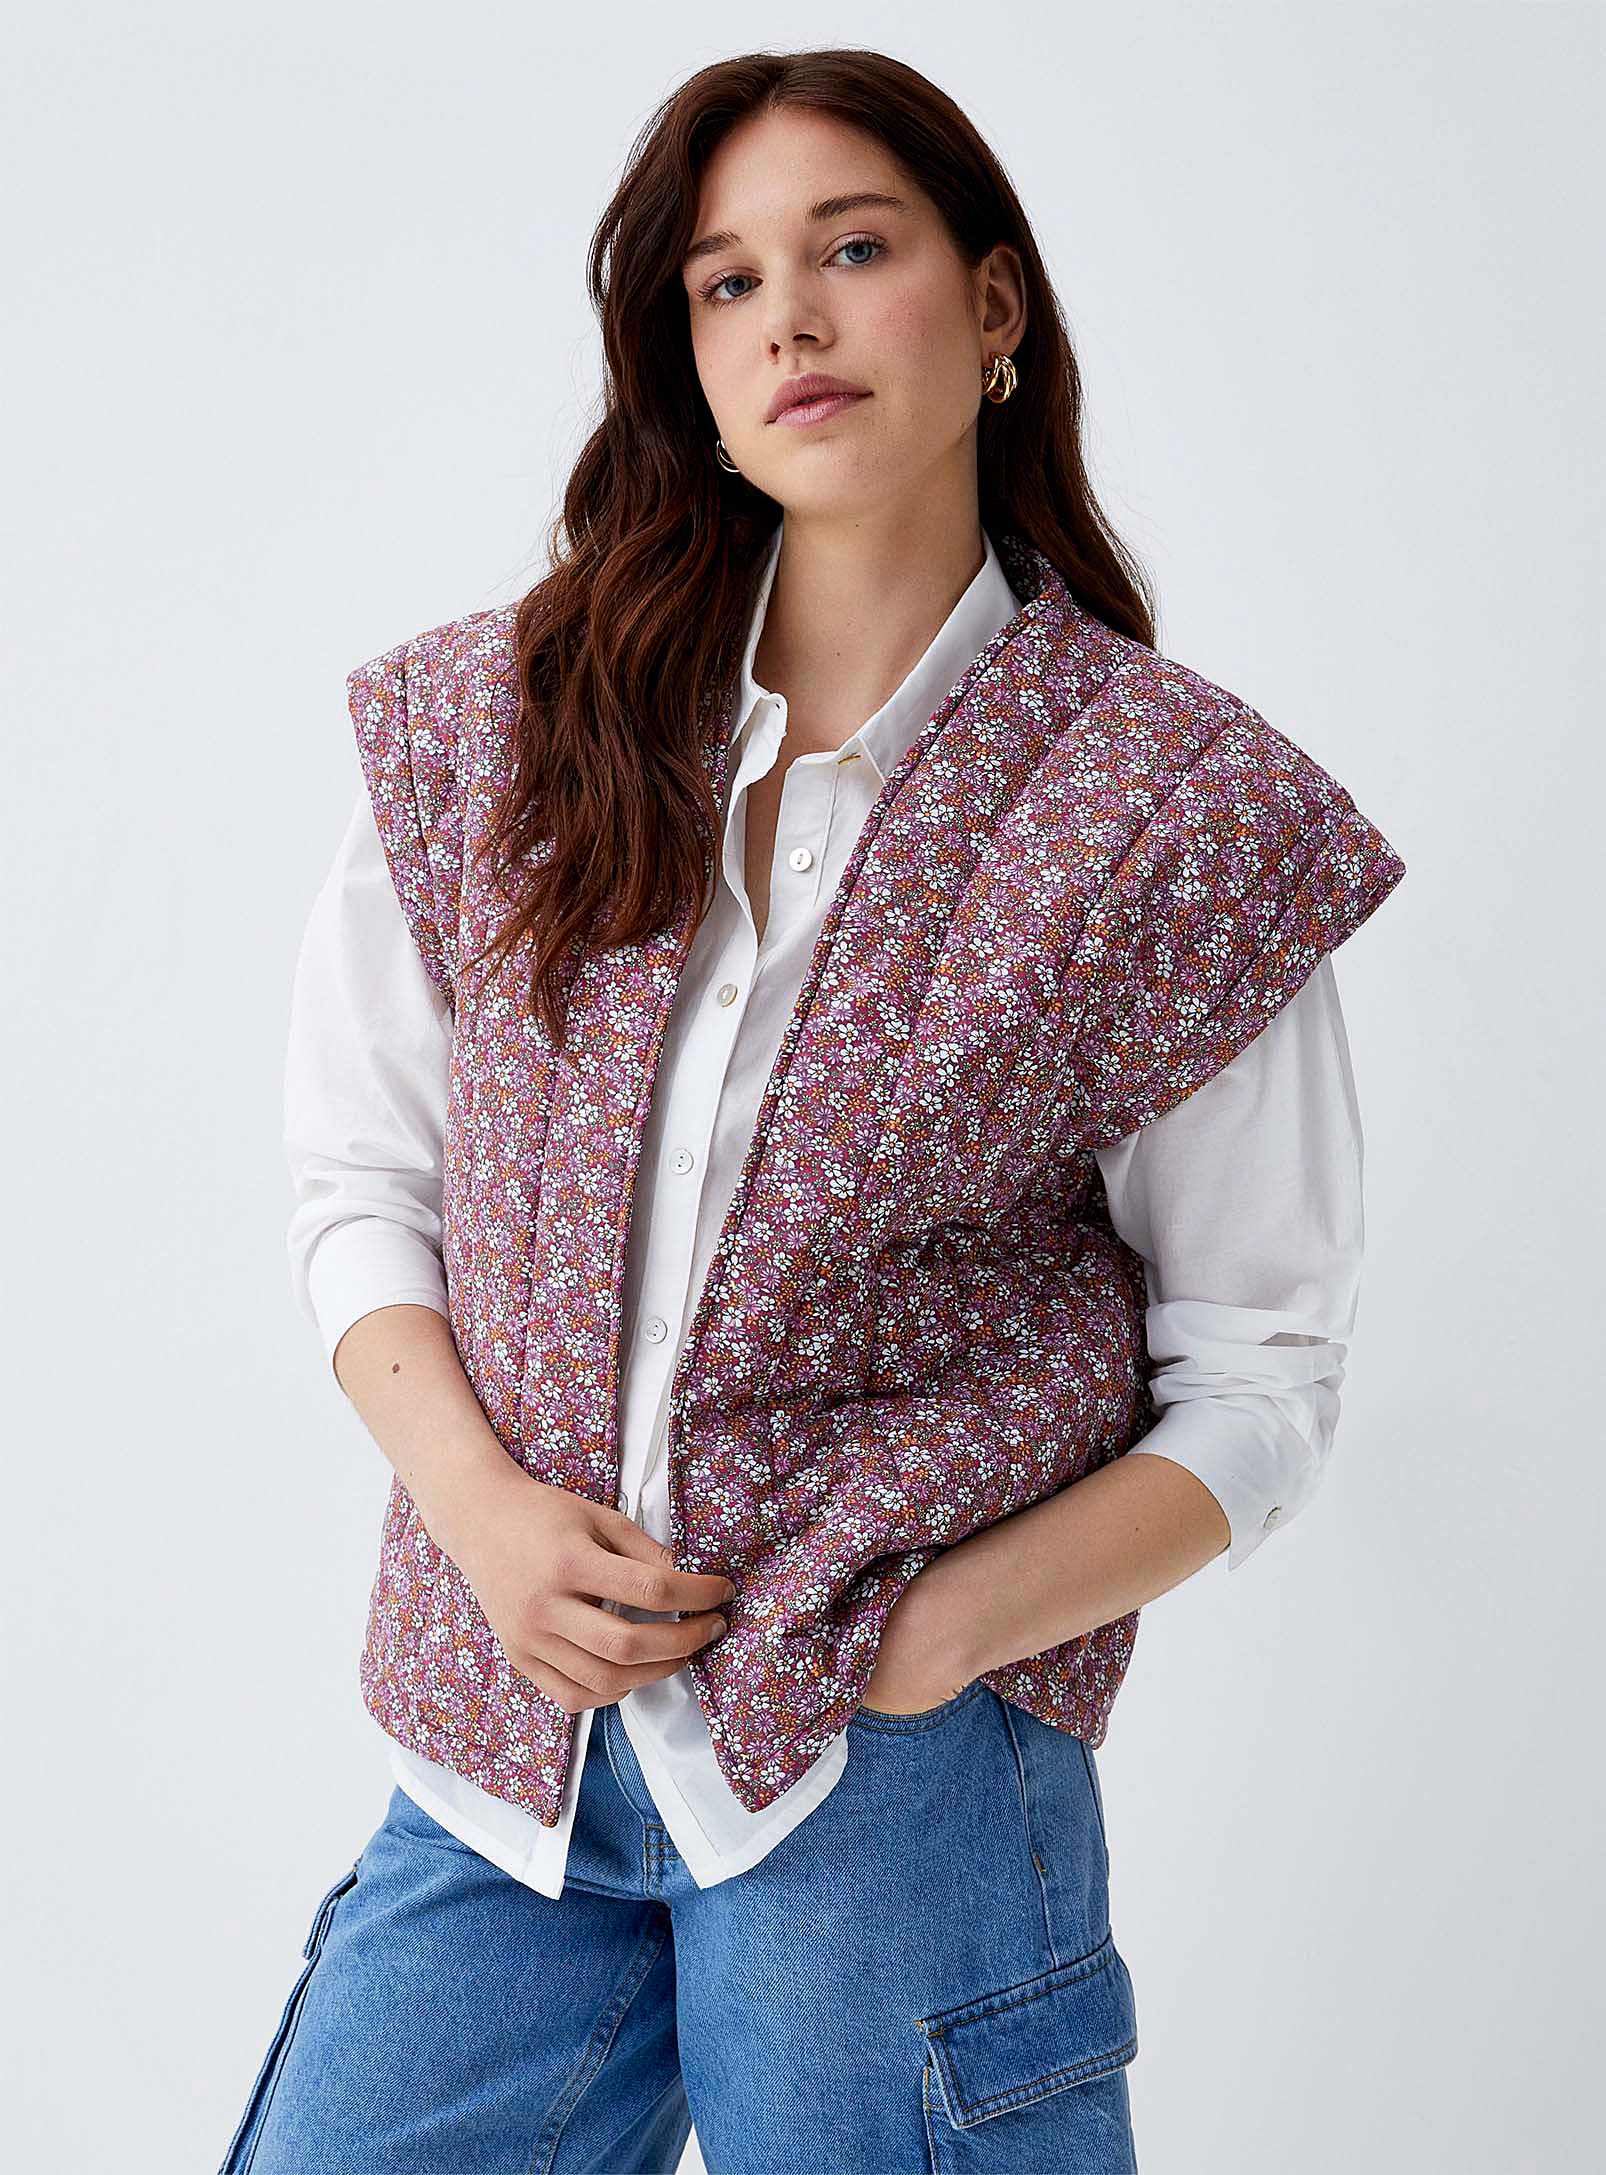 Things Between - Women's Summer flowers quilted sleeveless jacket